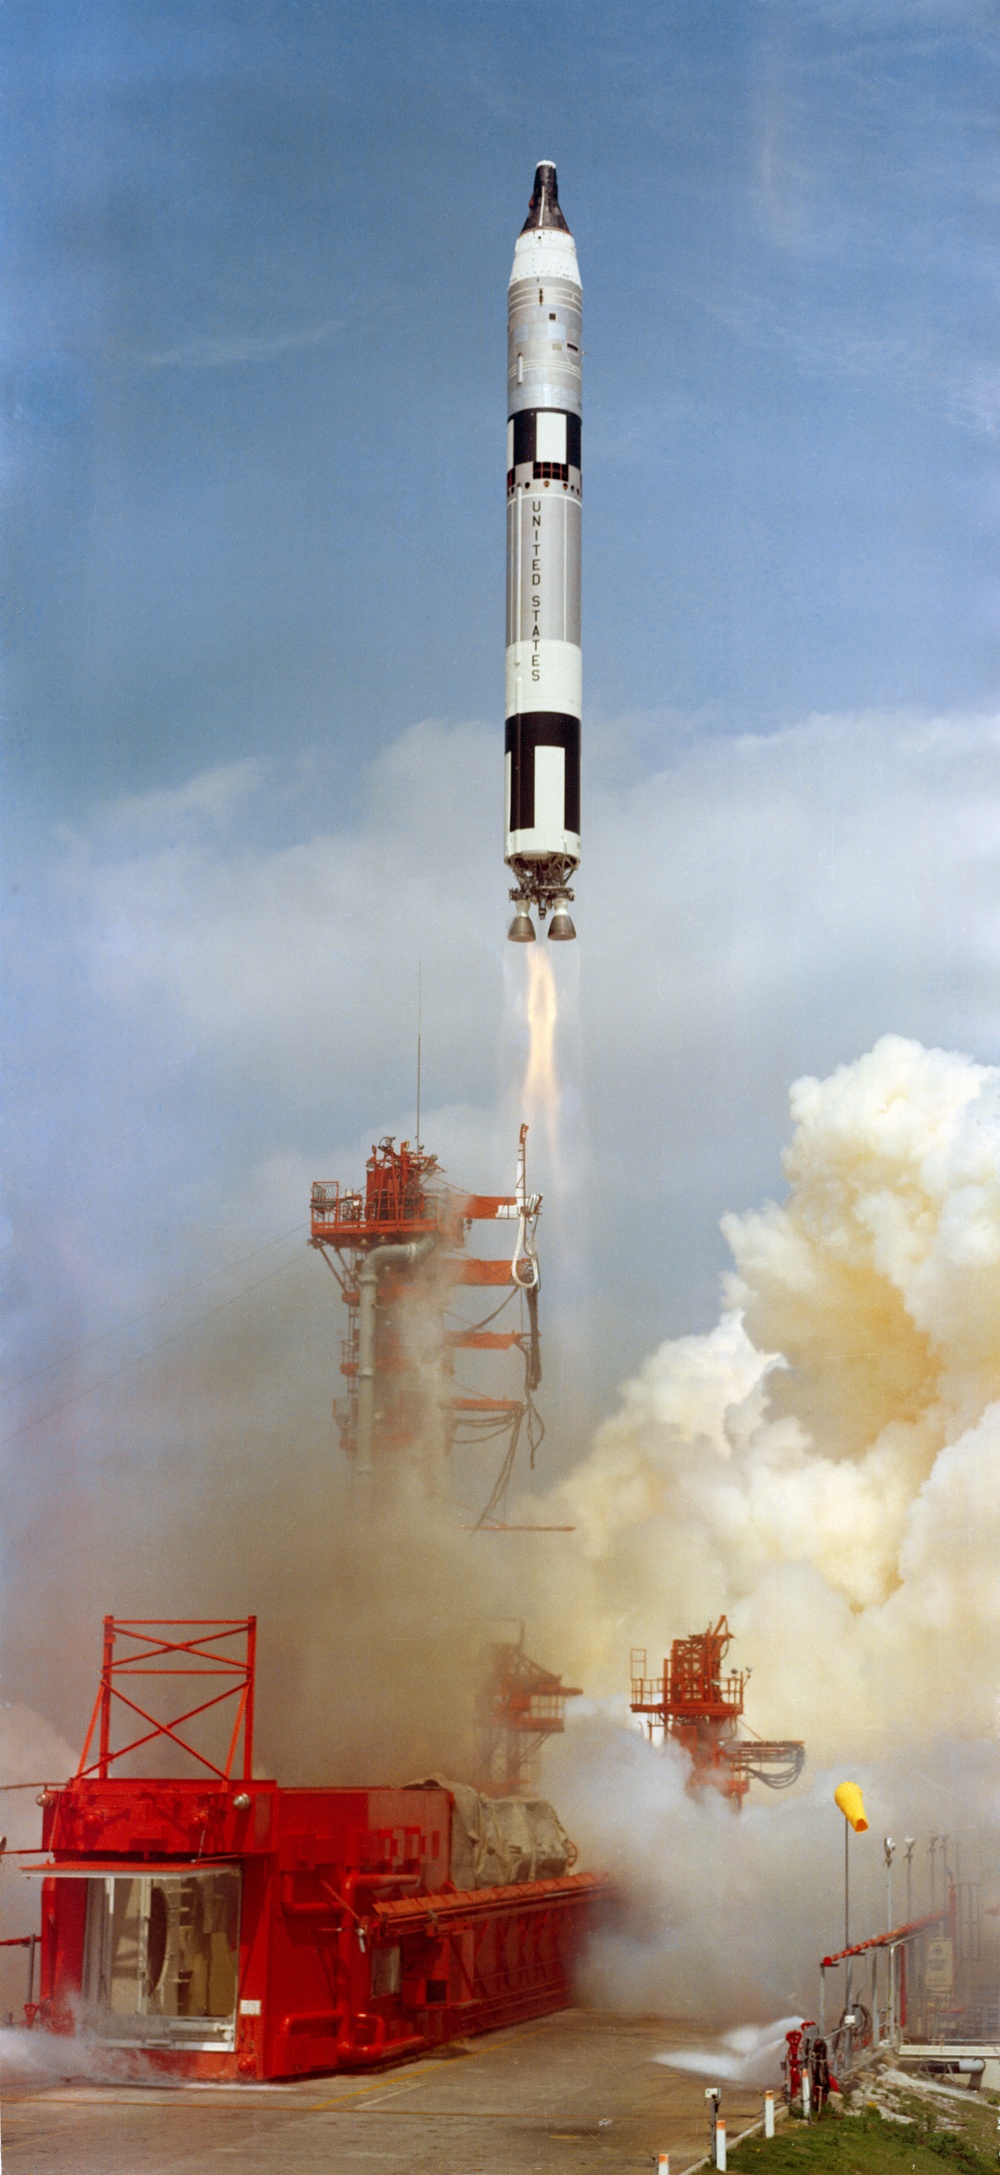 Gemini 8 spacecraft launched from Kennedy Space Center